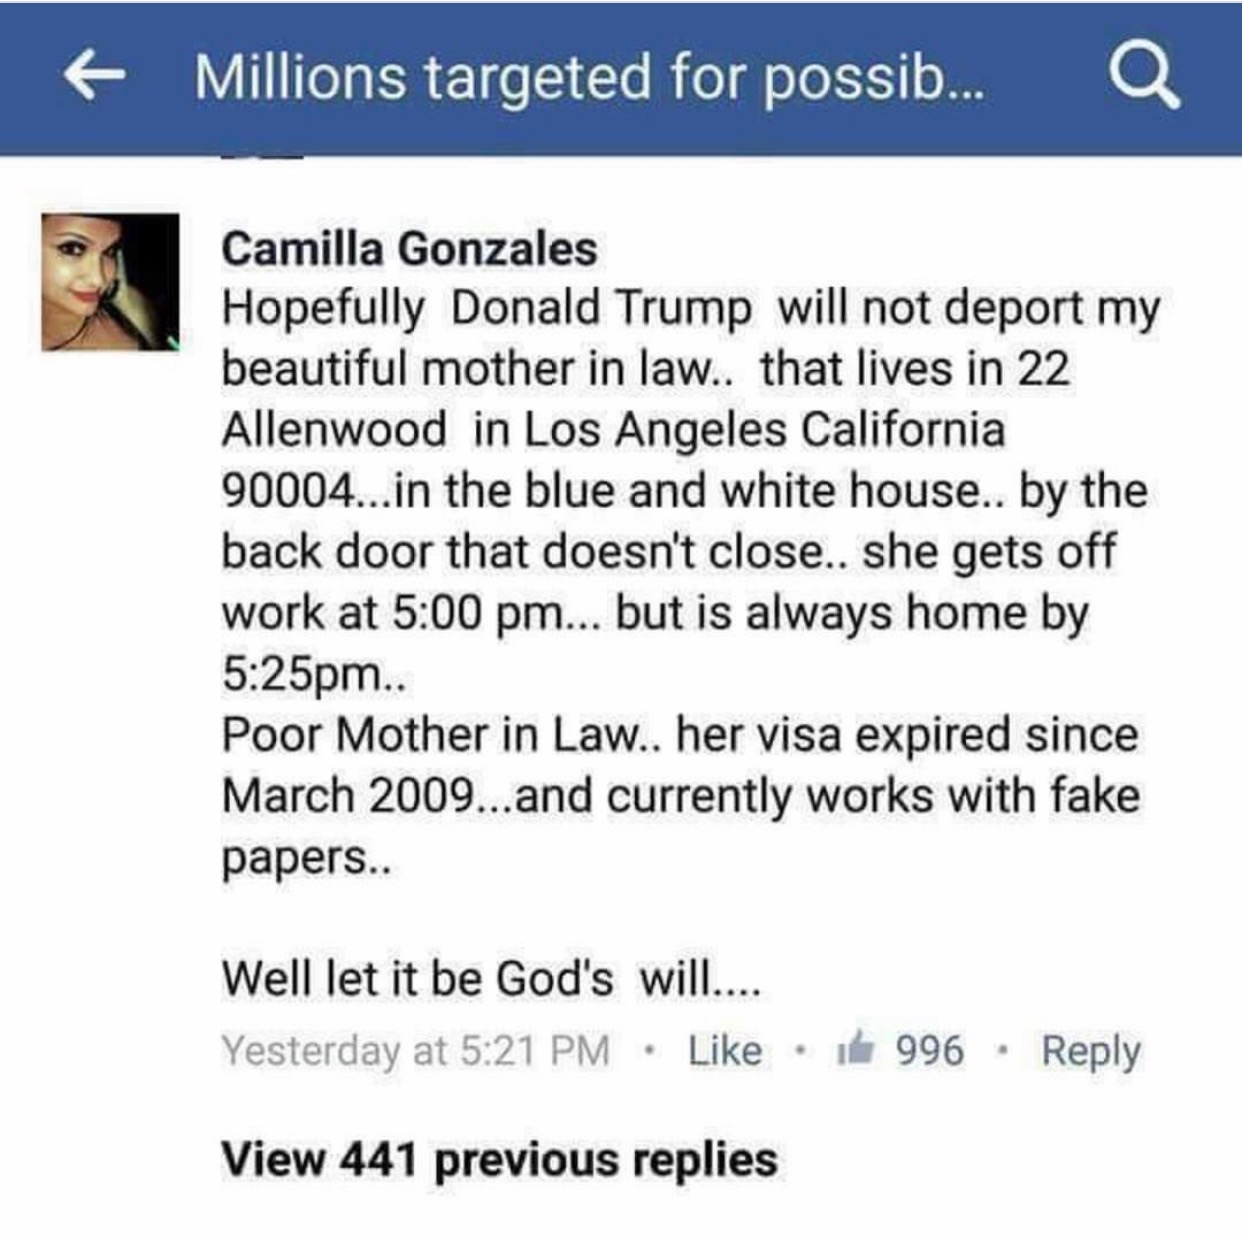 Millions targeted for possib... Q Camilla Gonzales Hopefully Donald Trump will not deport my beautiful mother in law.. that lives in 22 Allenwood in Los Angeles California 90004...in the blue and white house.. by the back door that doesn't close.. she get